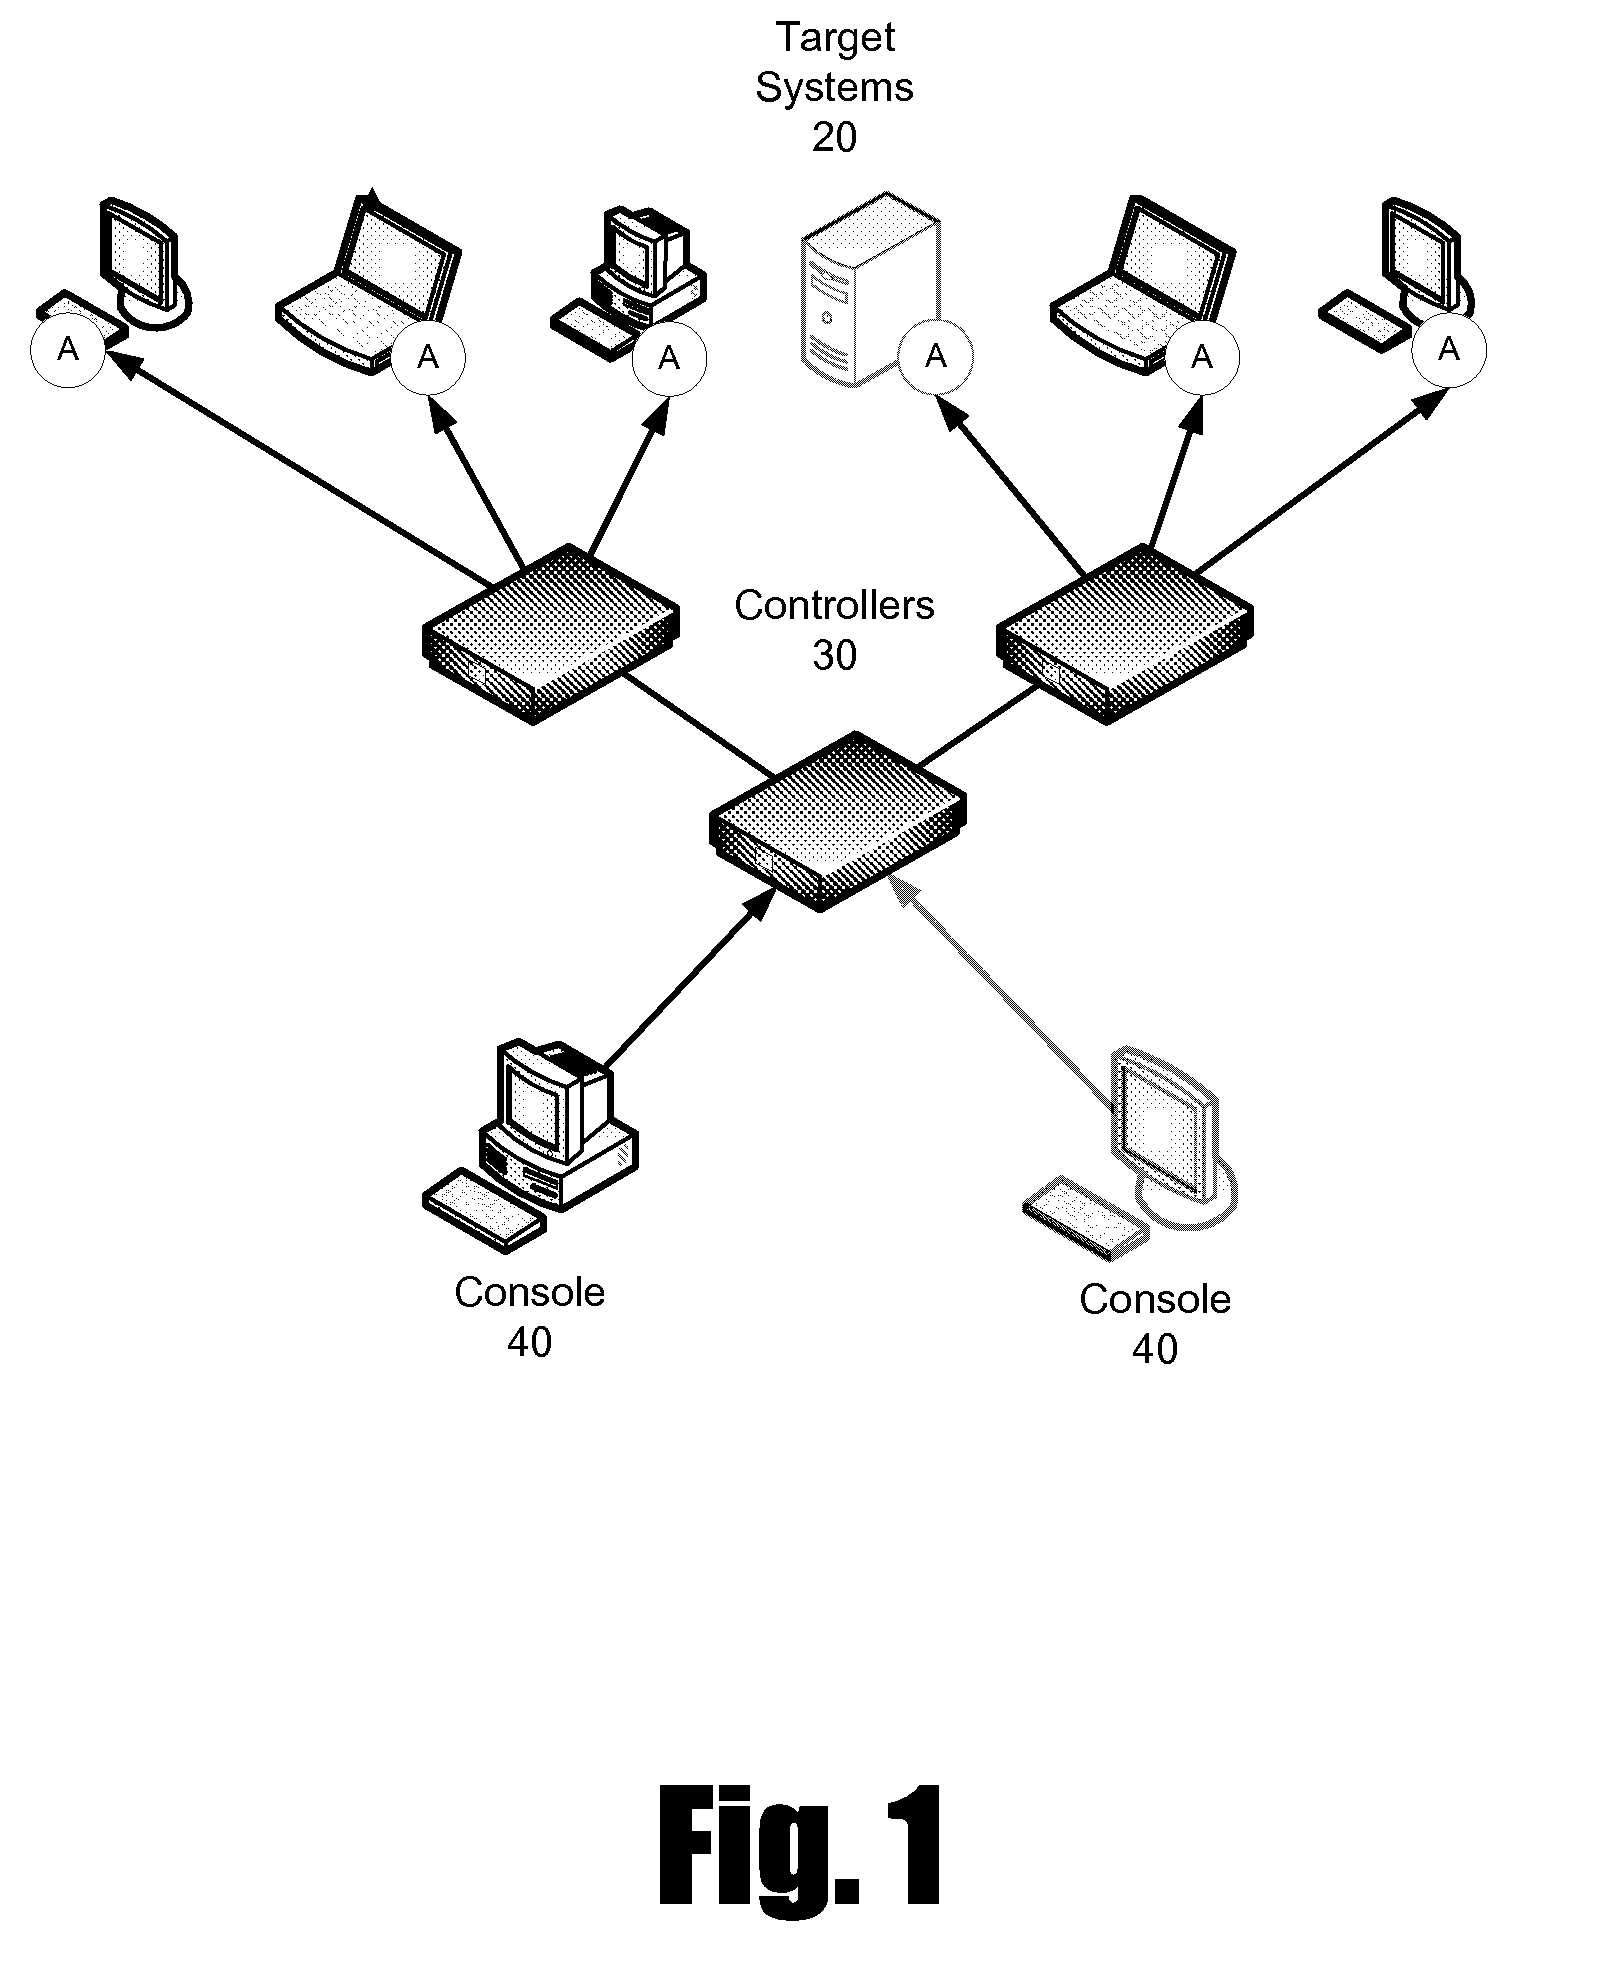 Method and system for analyzing data related to an event